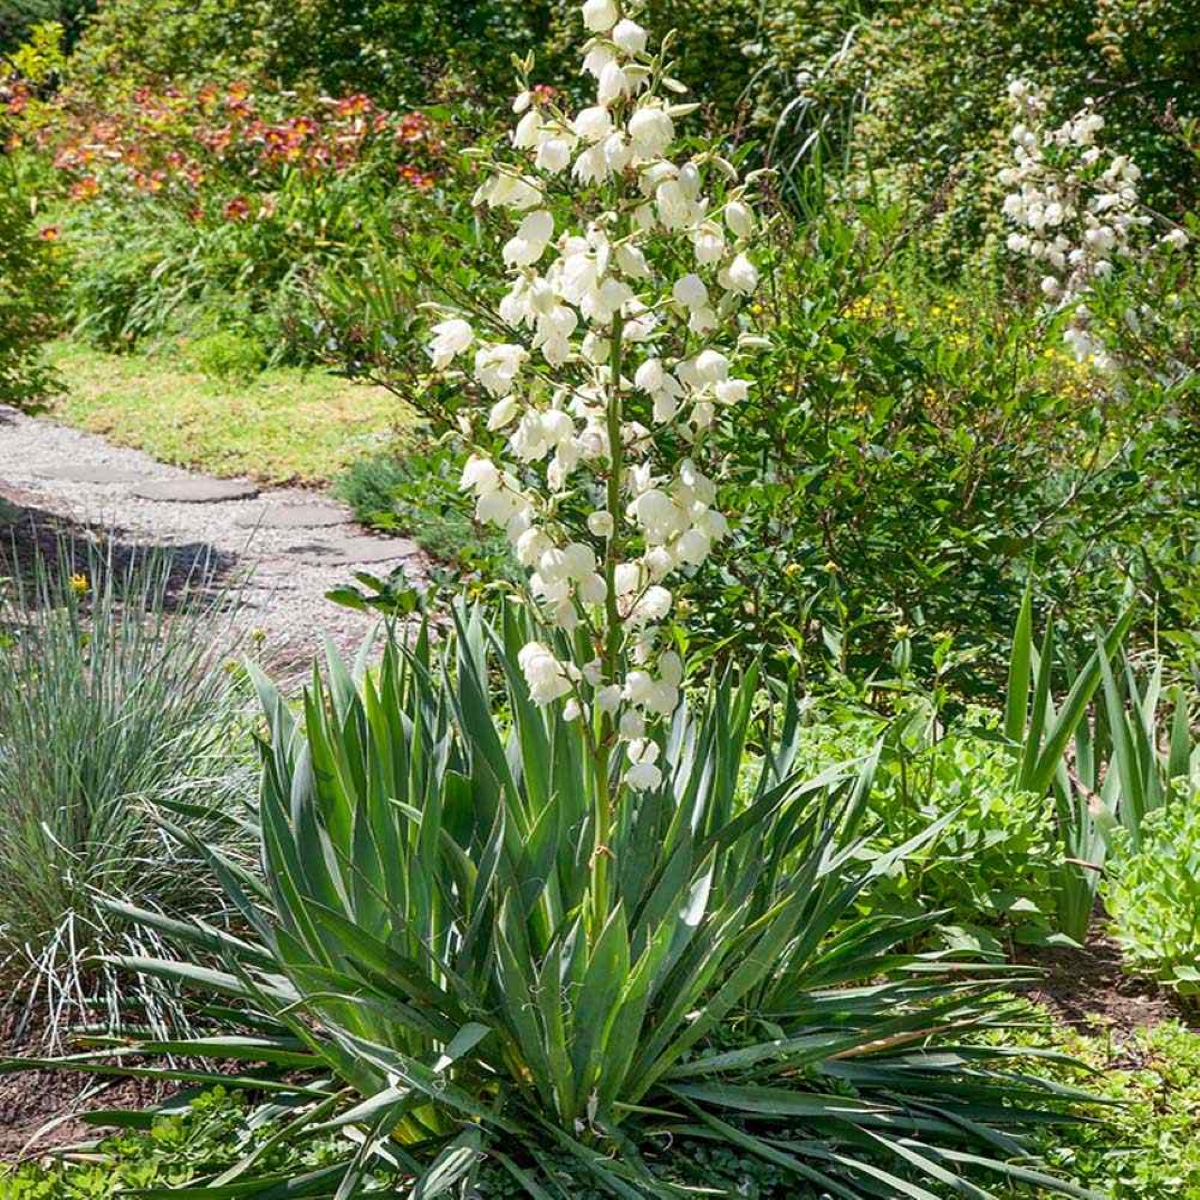 Yucca plant with white bell flowers